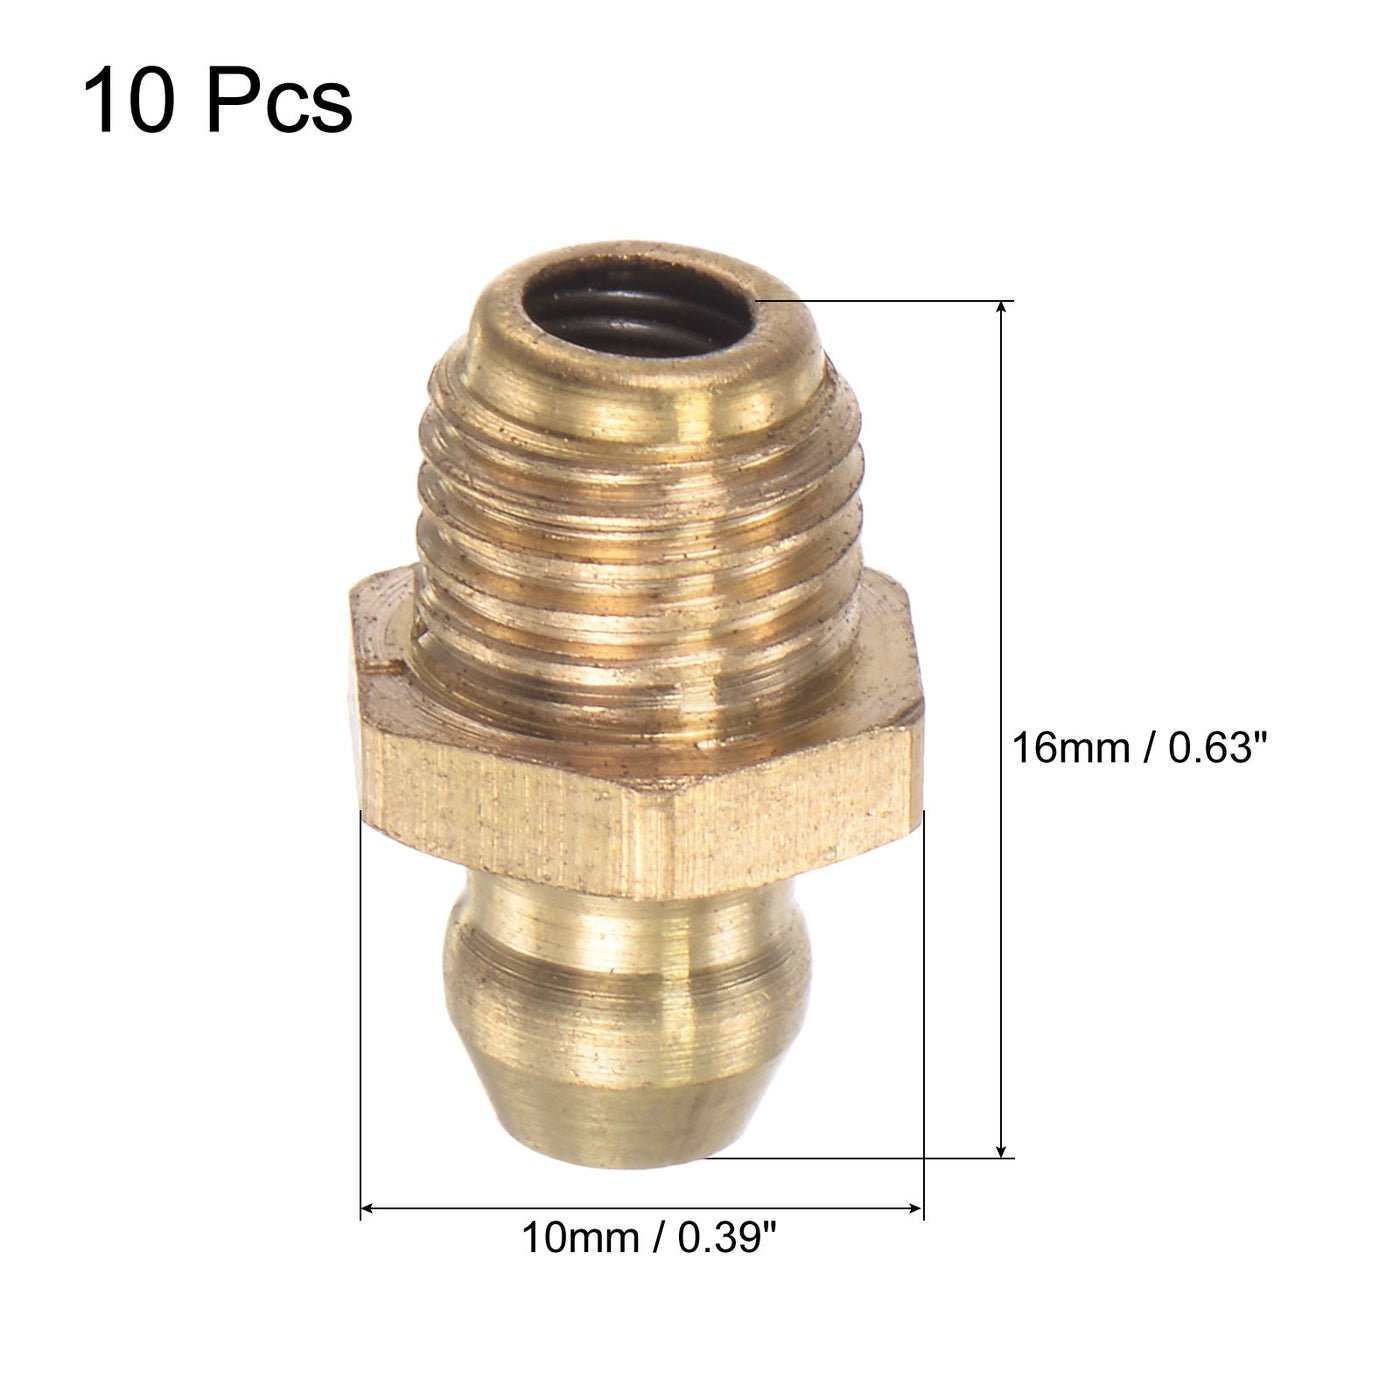 Uxcell Uxcell Brass Hydraulic Grease Fitting Assortment Accessories M12 x 1mm Thread, 10Pcs